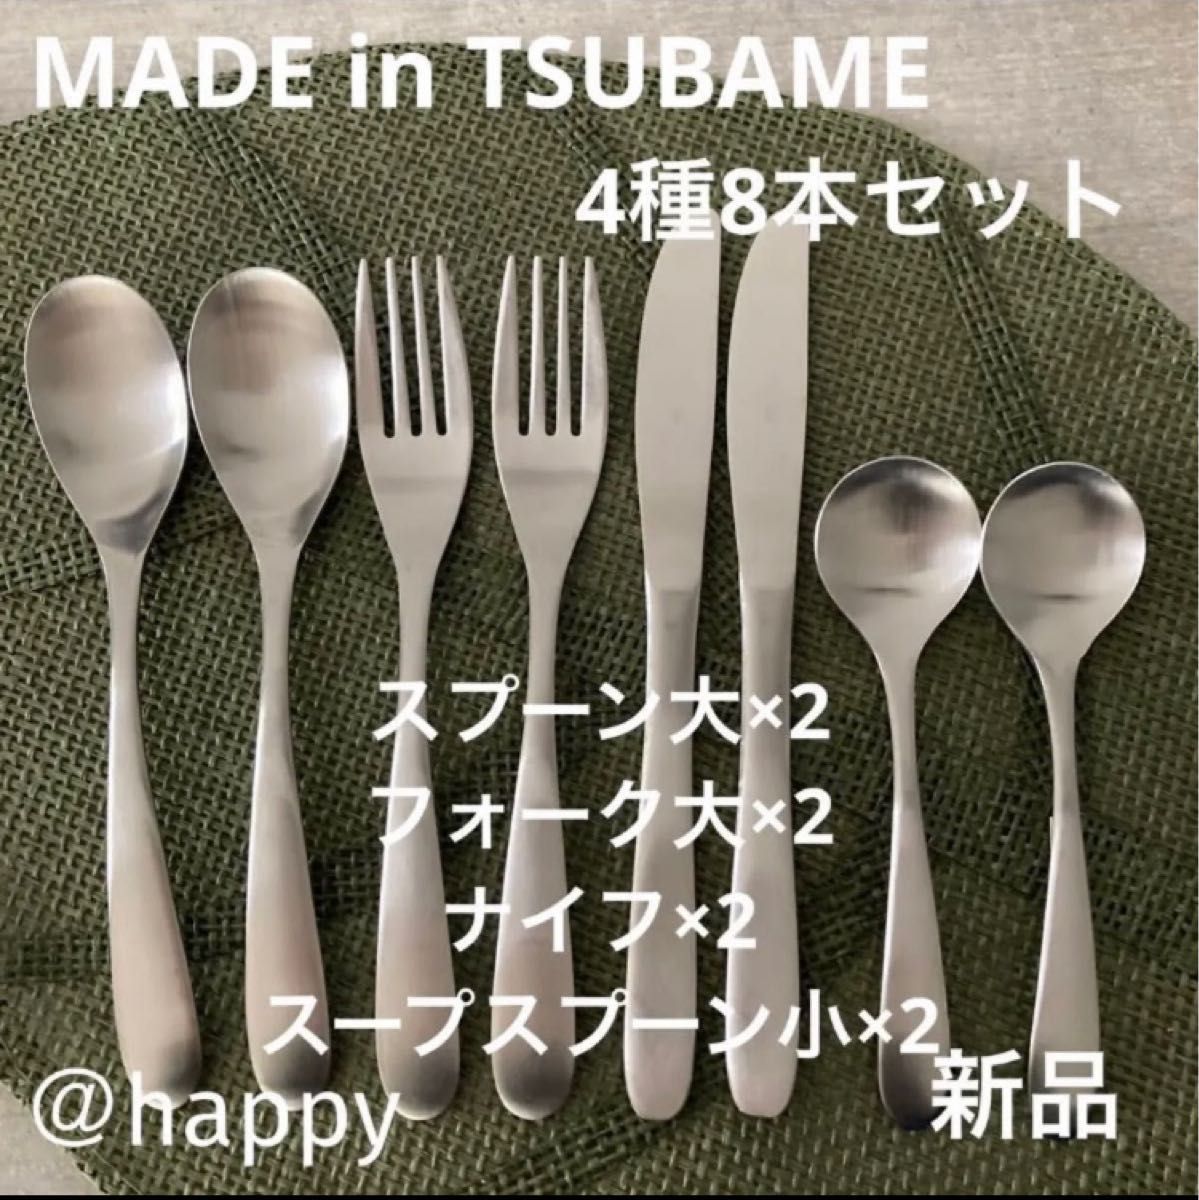 Made in TSUBAMEカトラリー4種8本セットフォーク大×2ナイフ×2スプーン大×2スープスプーン小×2 新品 燕三条